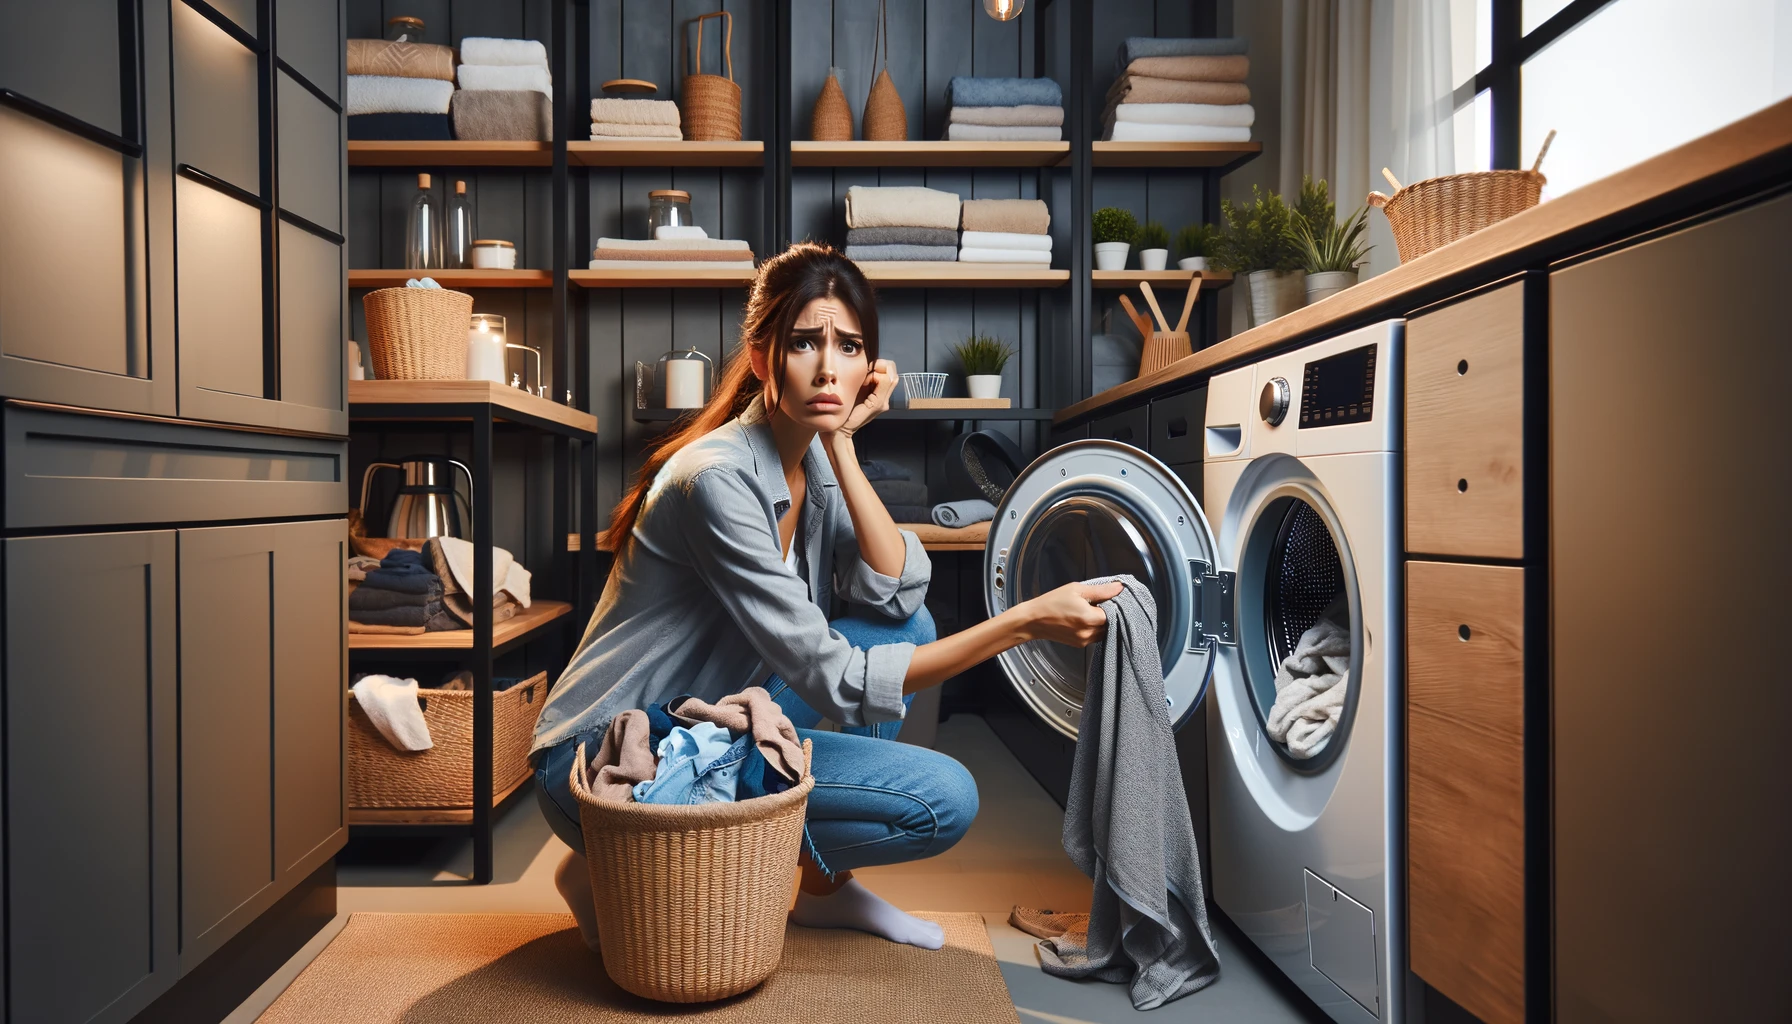 Get Your Laundry Appliances Holiday-Ready